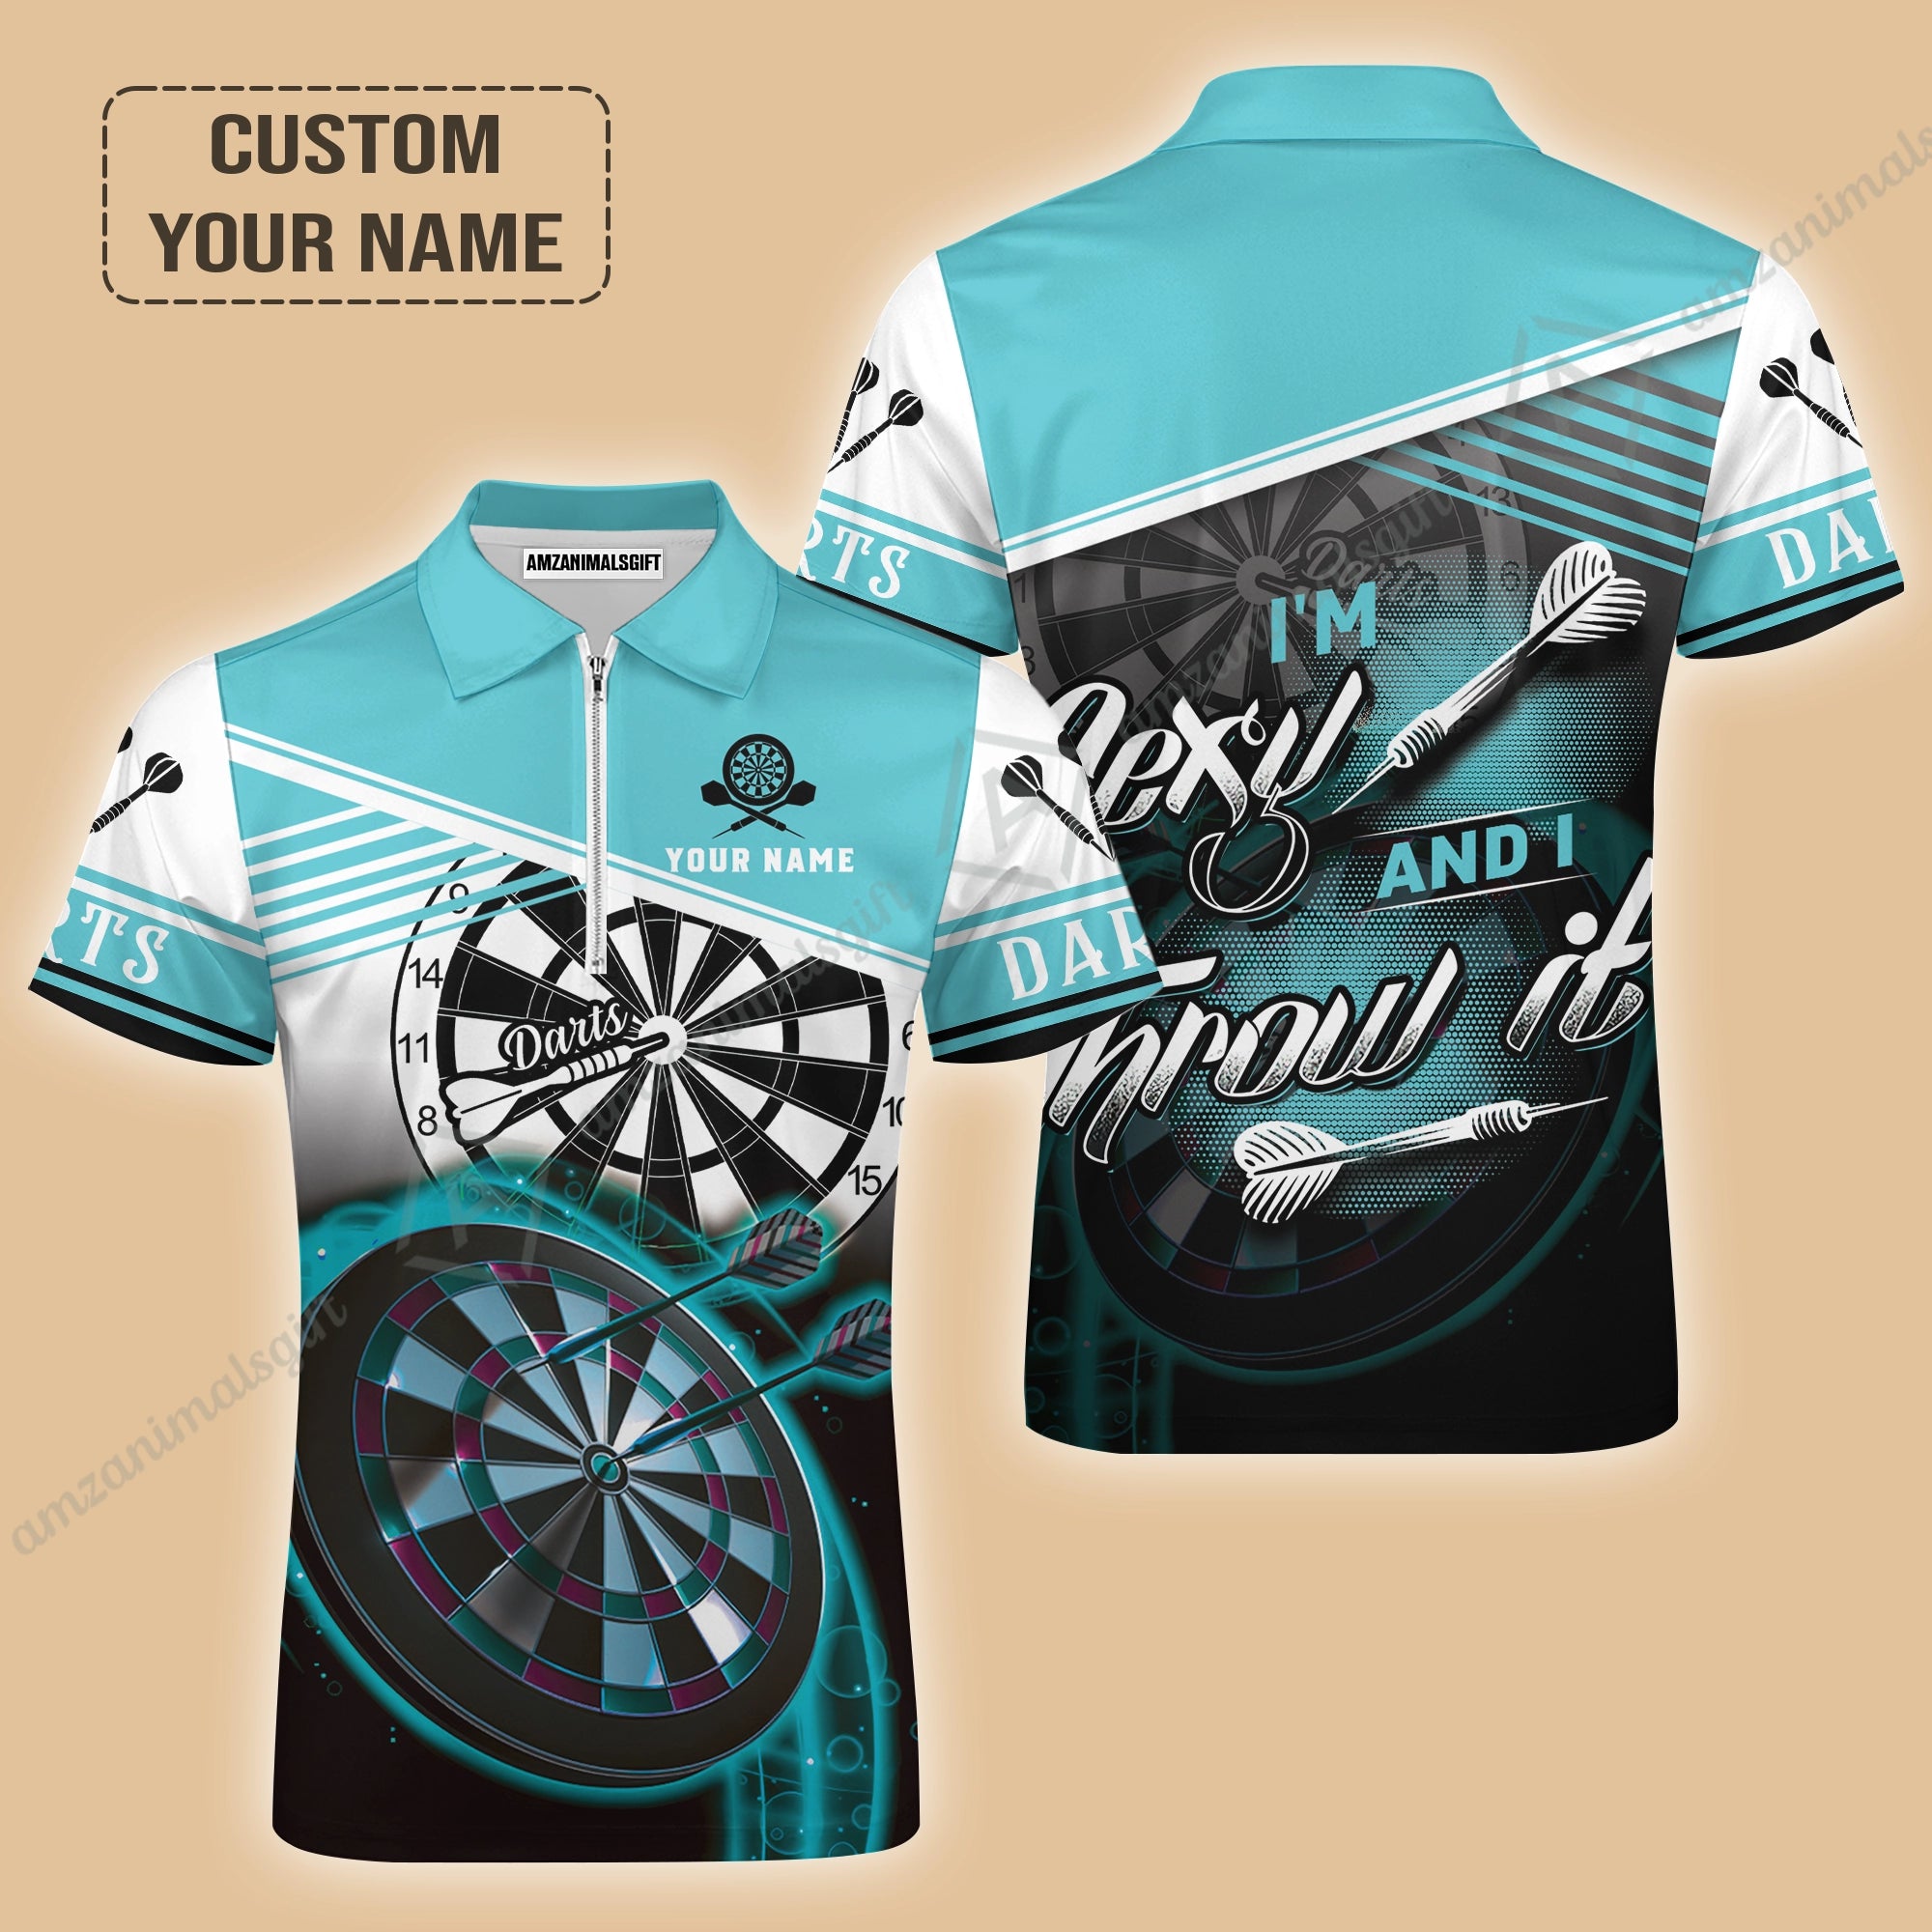 Personalized Darts Jersey, Darts Cyan Color Customized Quarter-Zip Polo Shirt I'm Sexy And I Throw It, Outfits For Darts Players, Darts Team